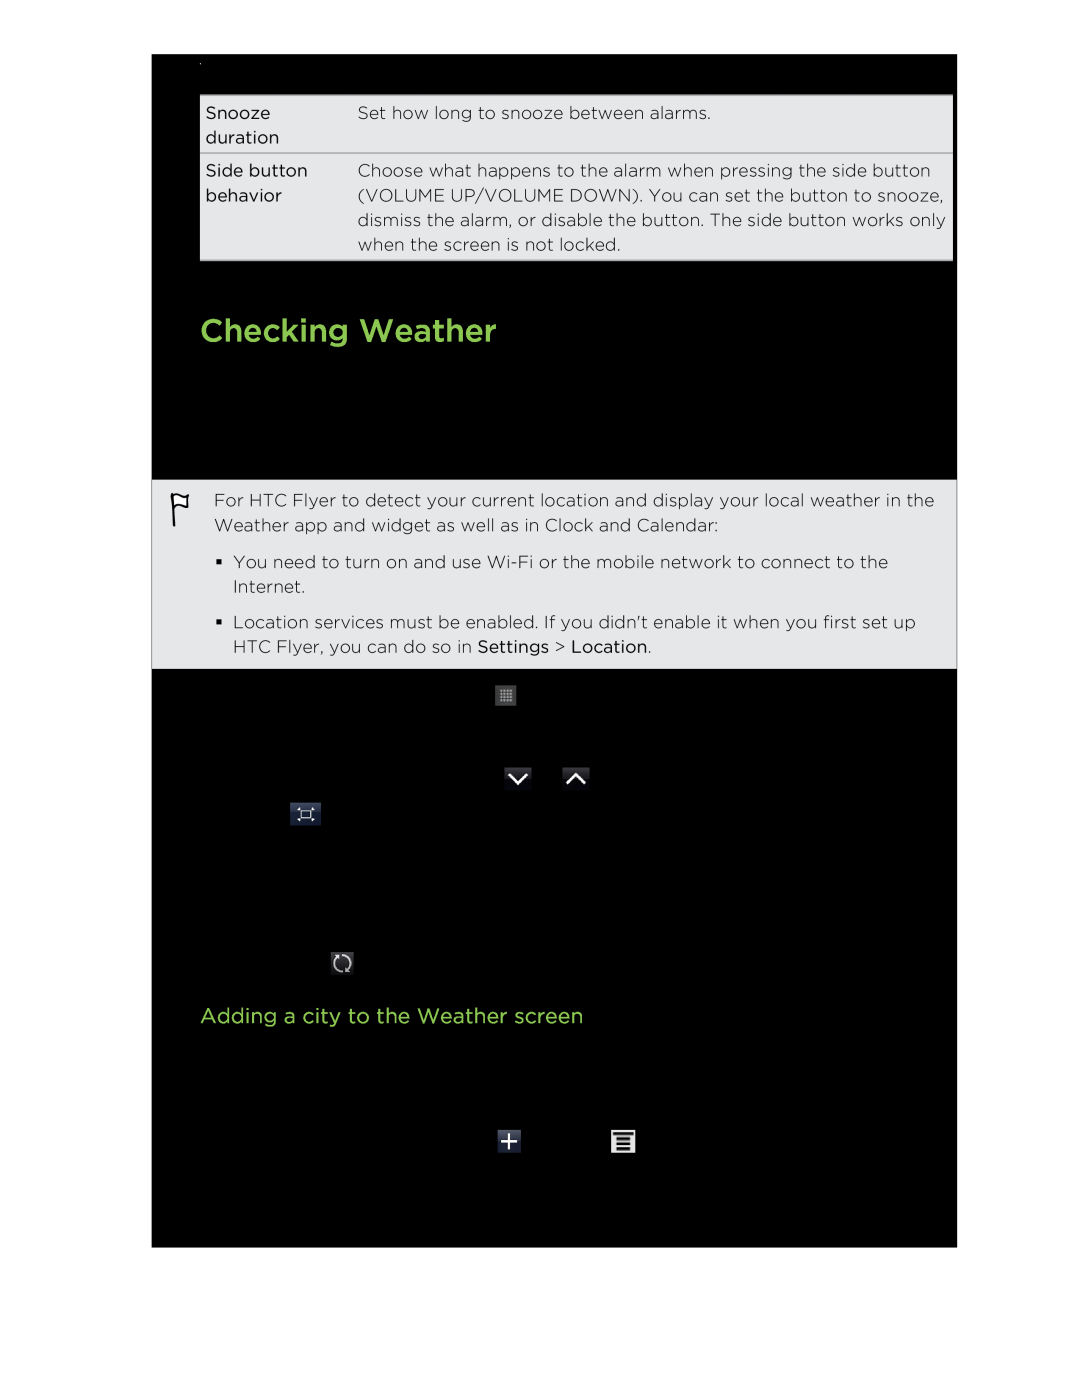 HTC HTCFlyerP512 manual Checking Weather, Adding a city to the Weather screen 